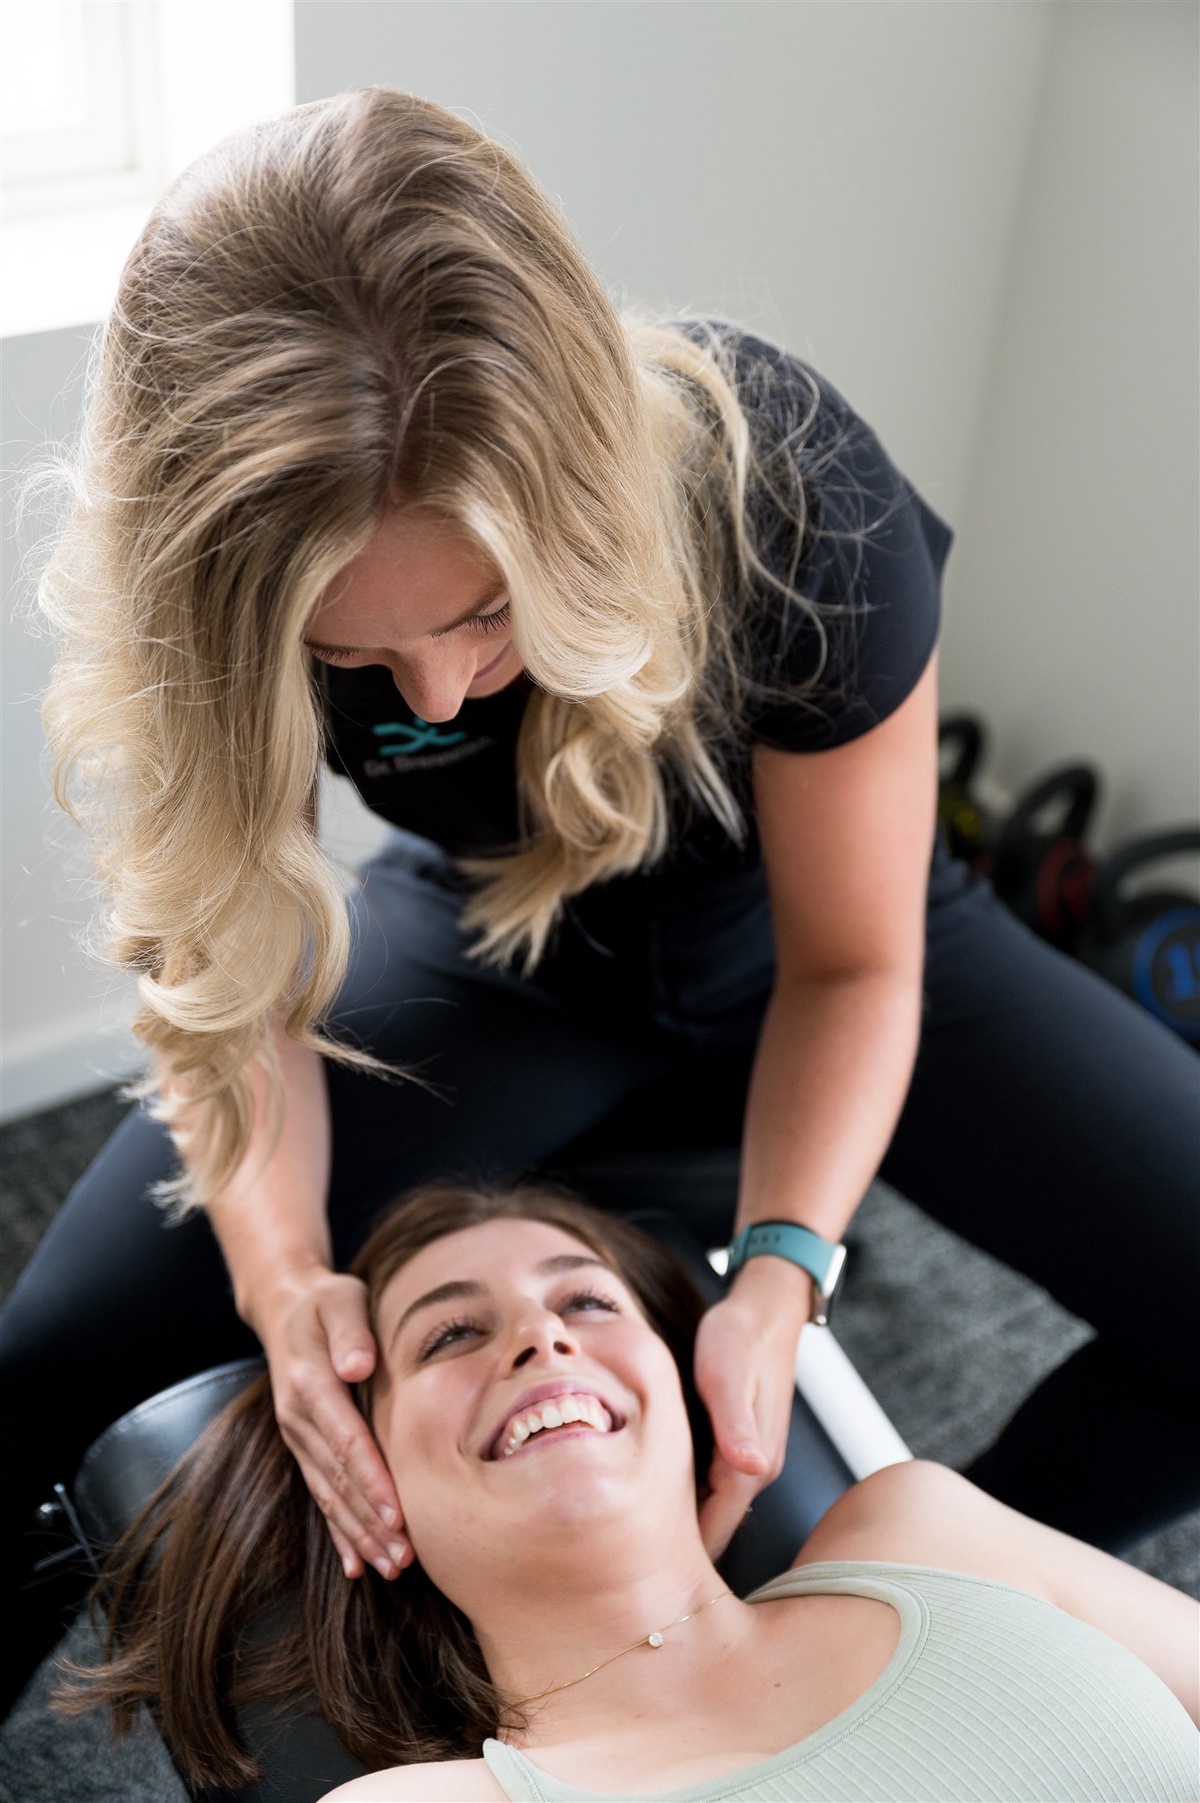 12 Ways Chiropractic Care Services Improve Your Health